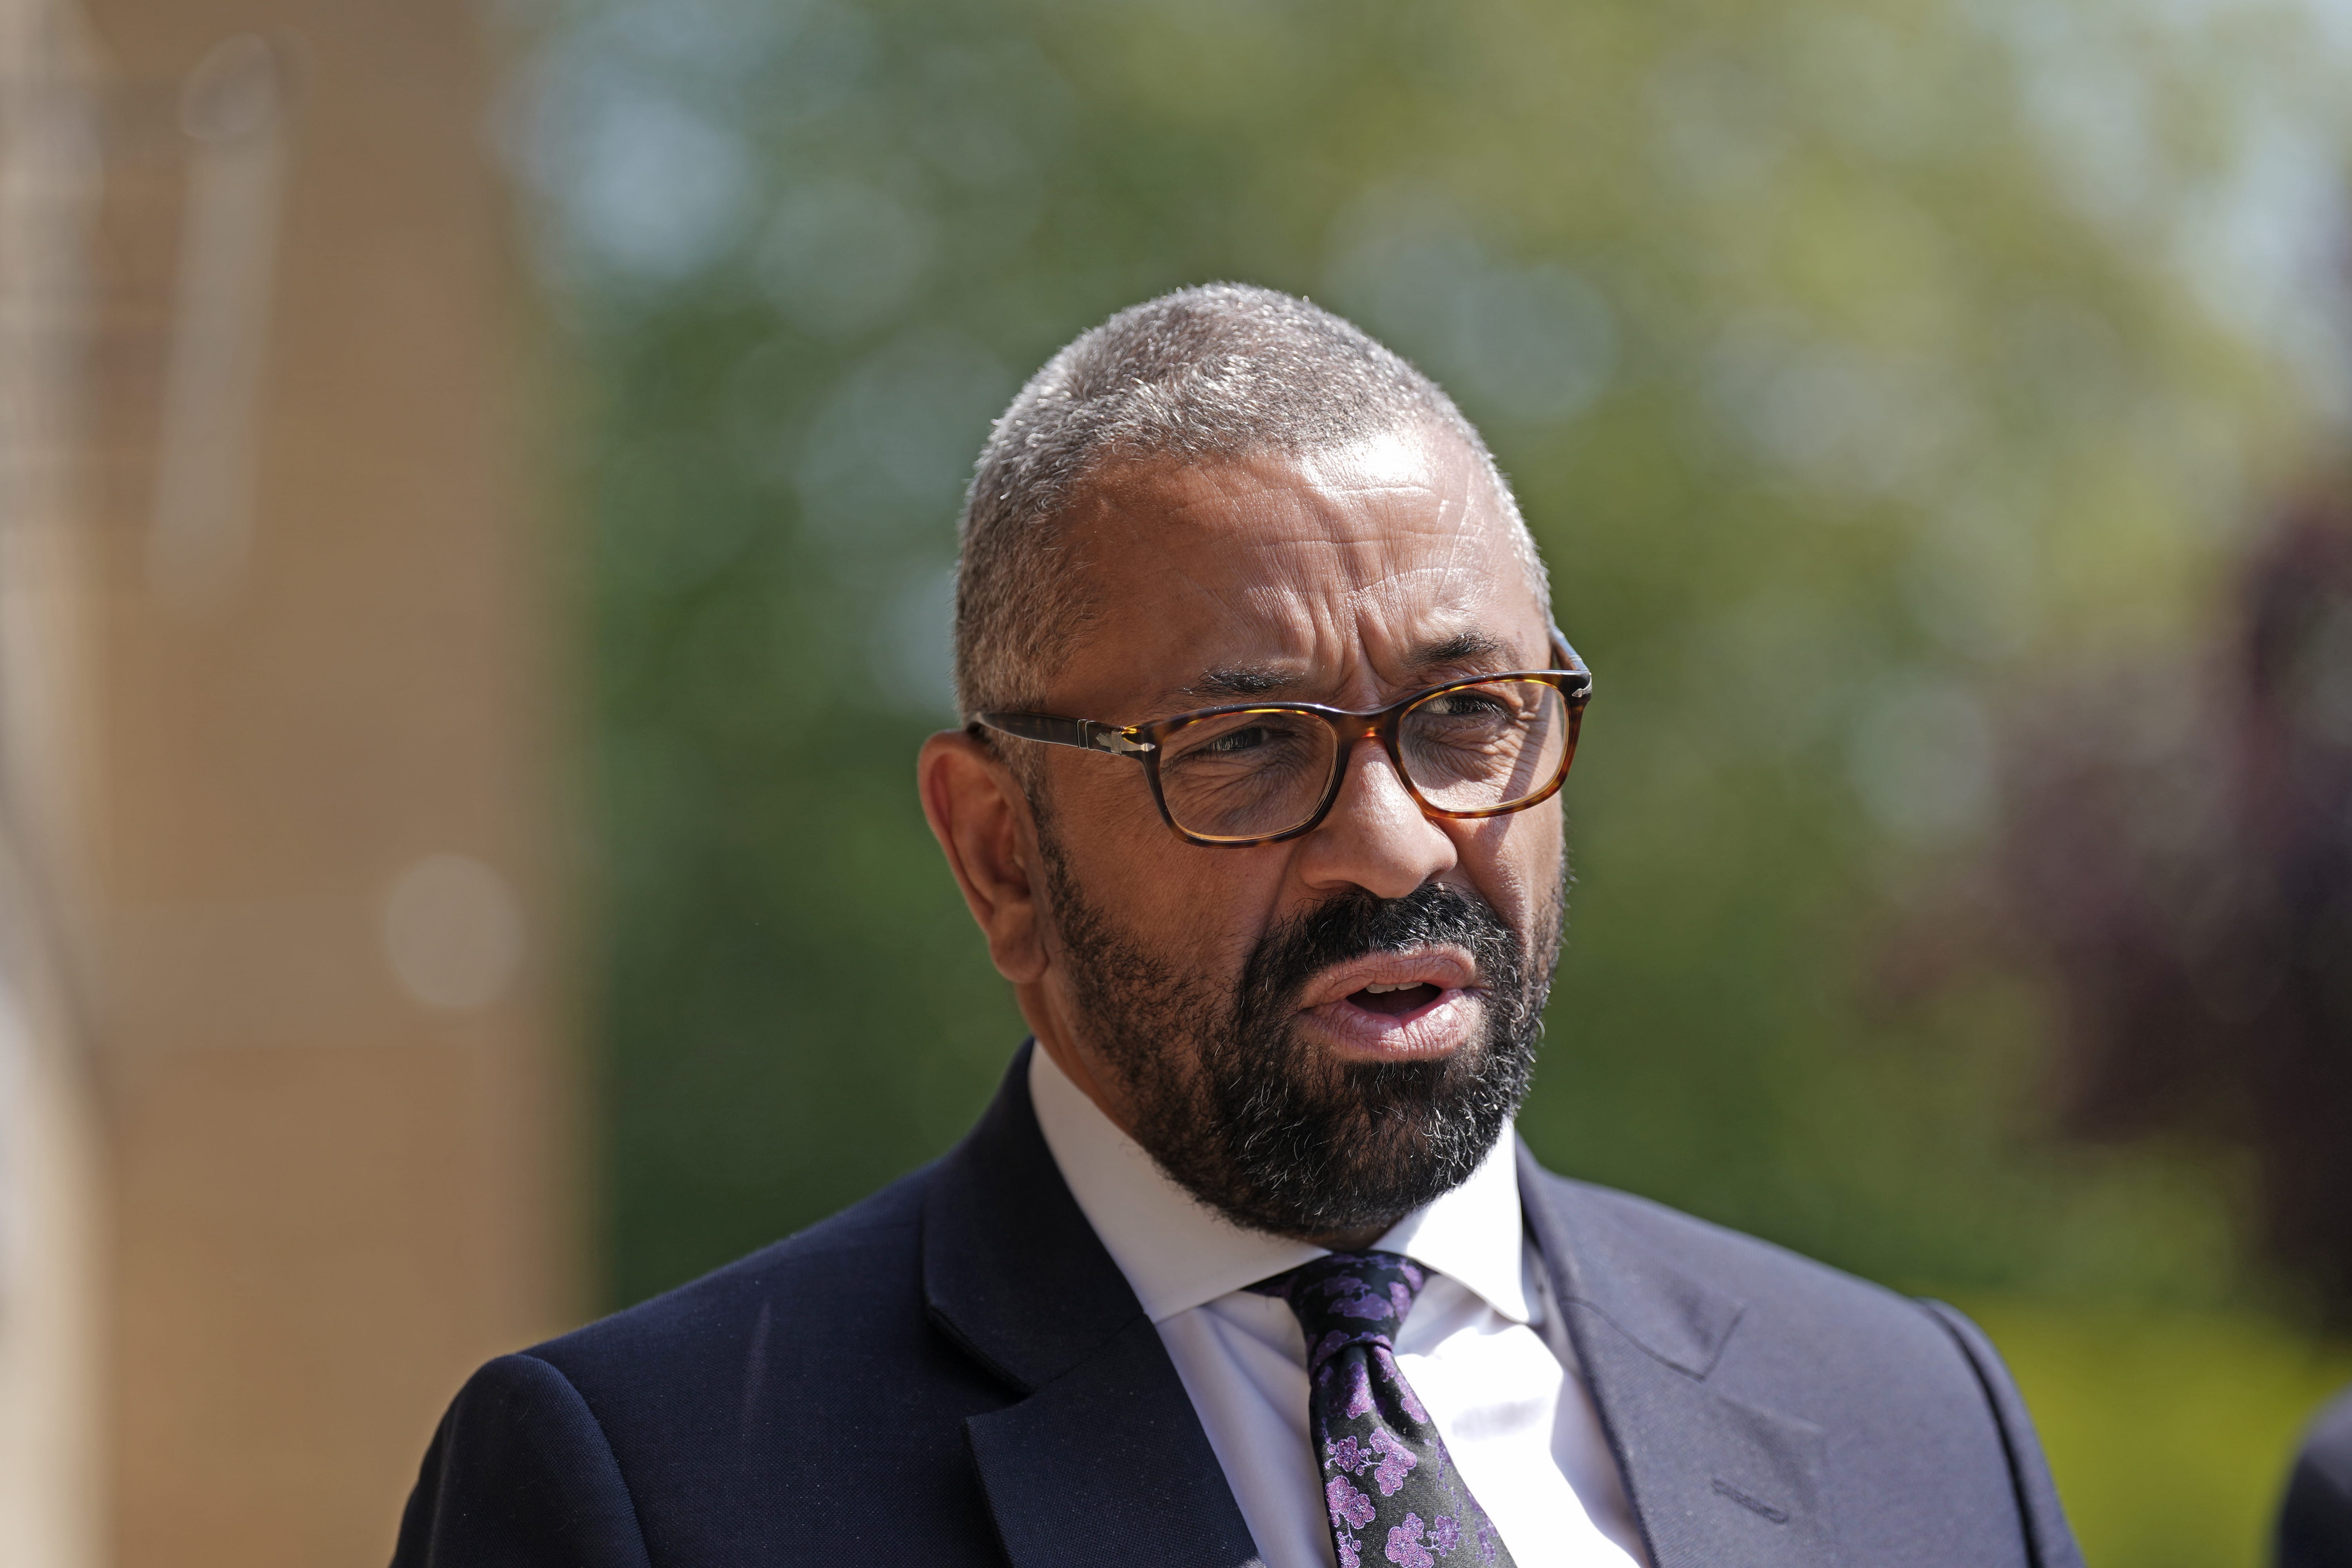 James Cleverly hailed the latest provisional data on student and foreign care worker visa applications